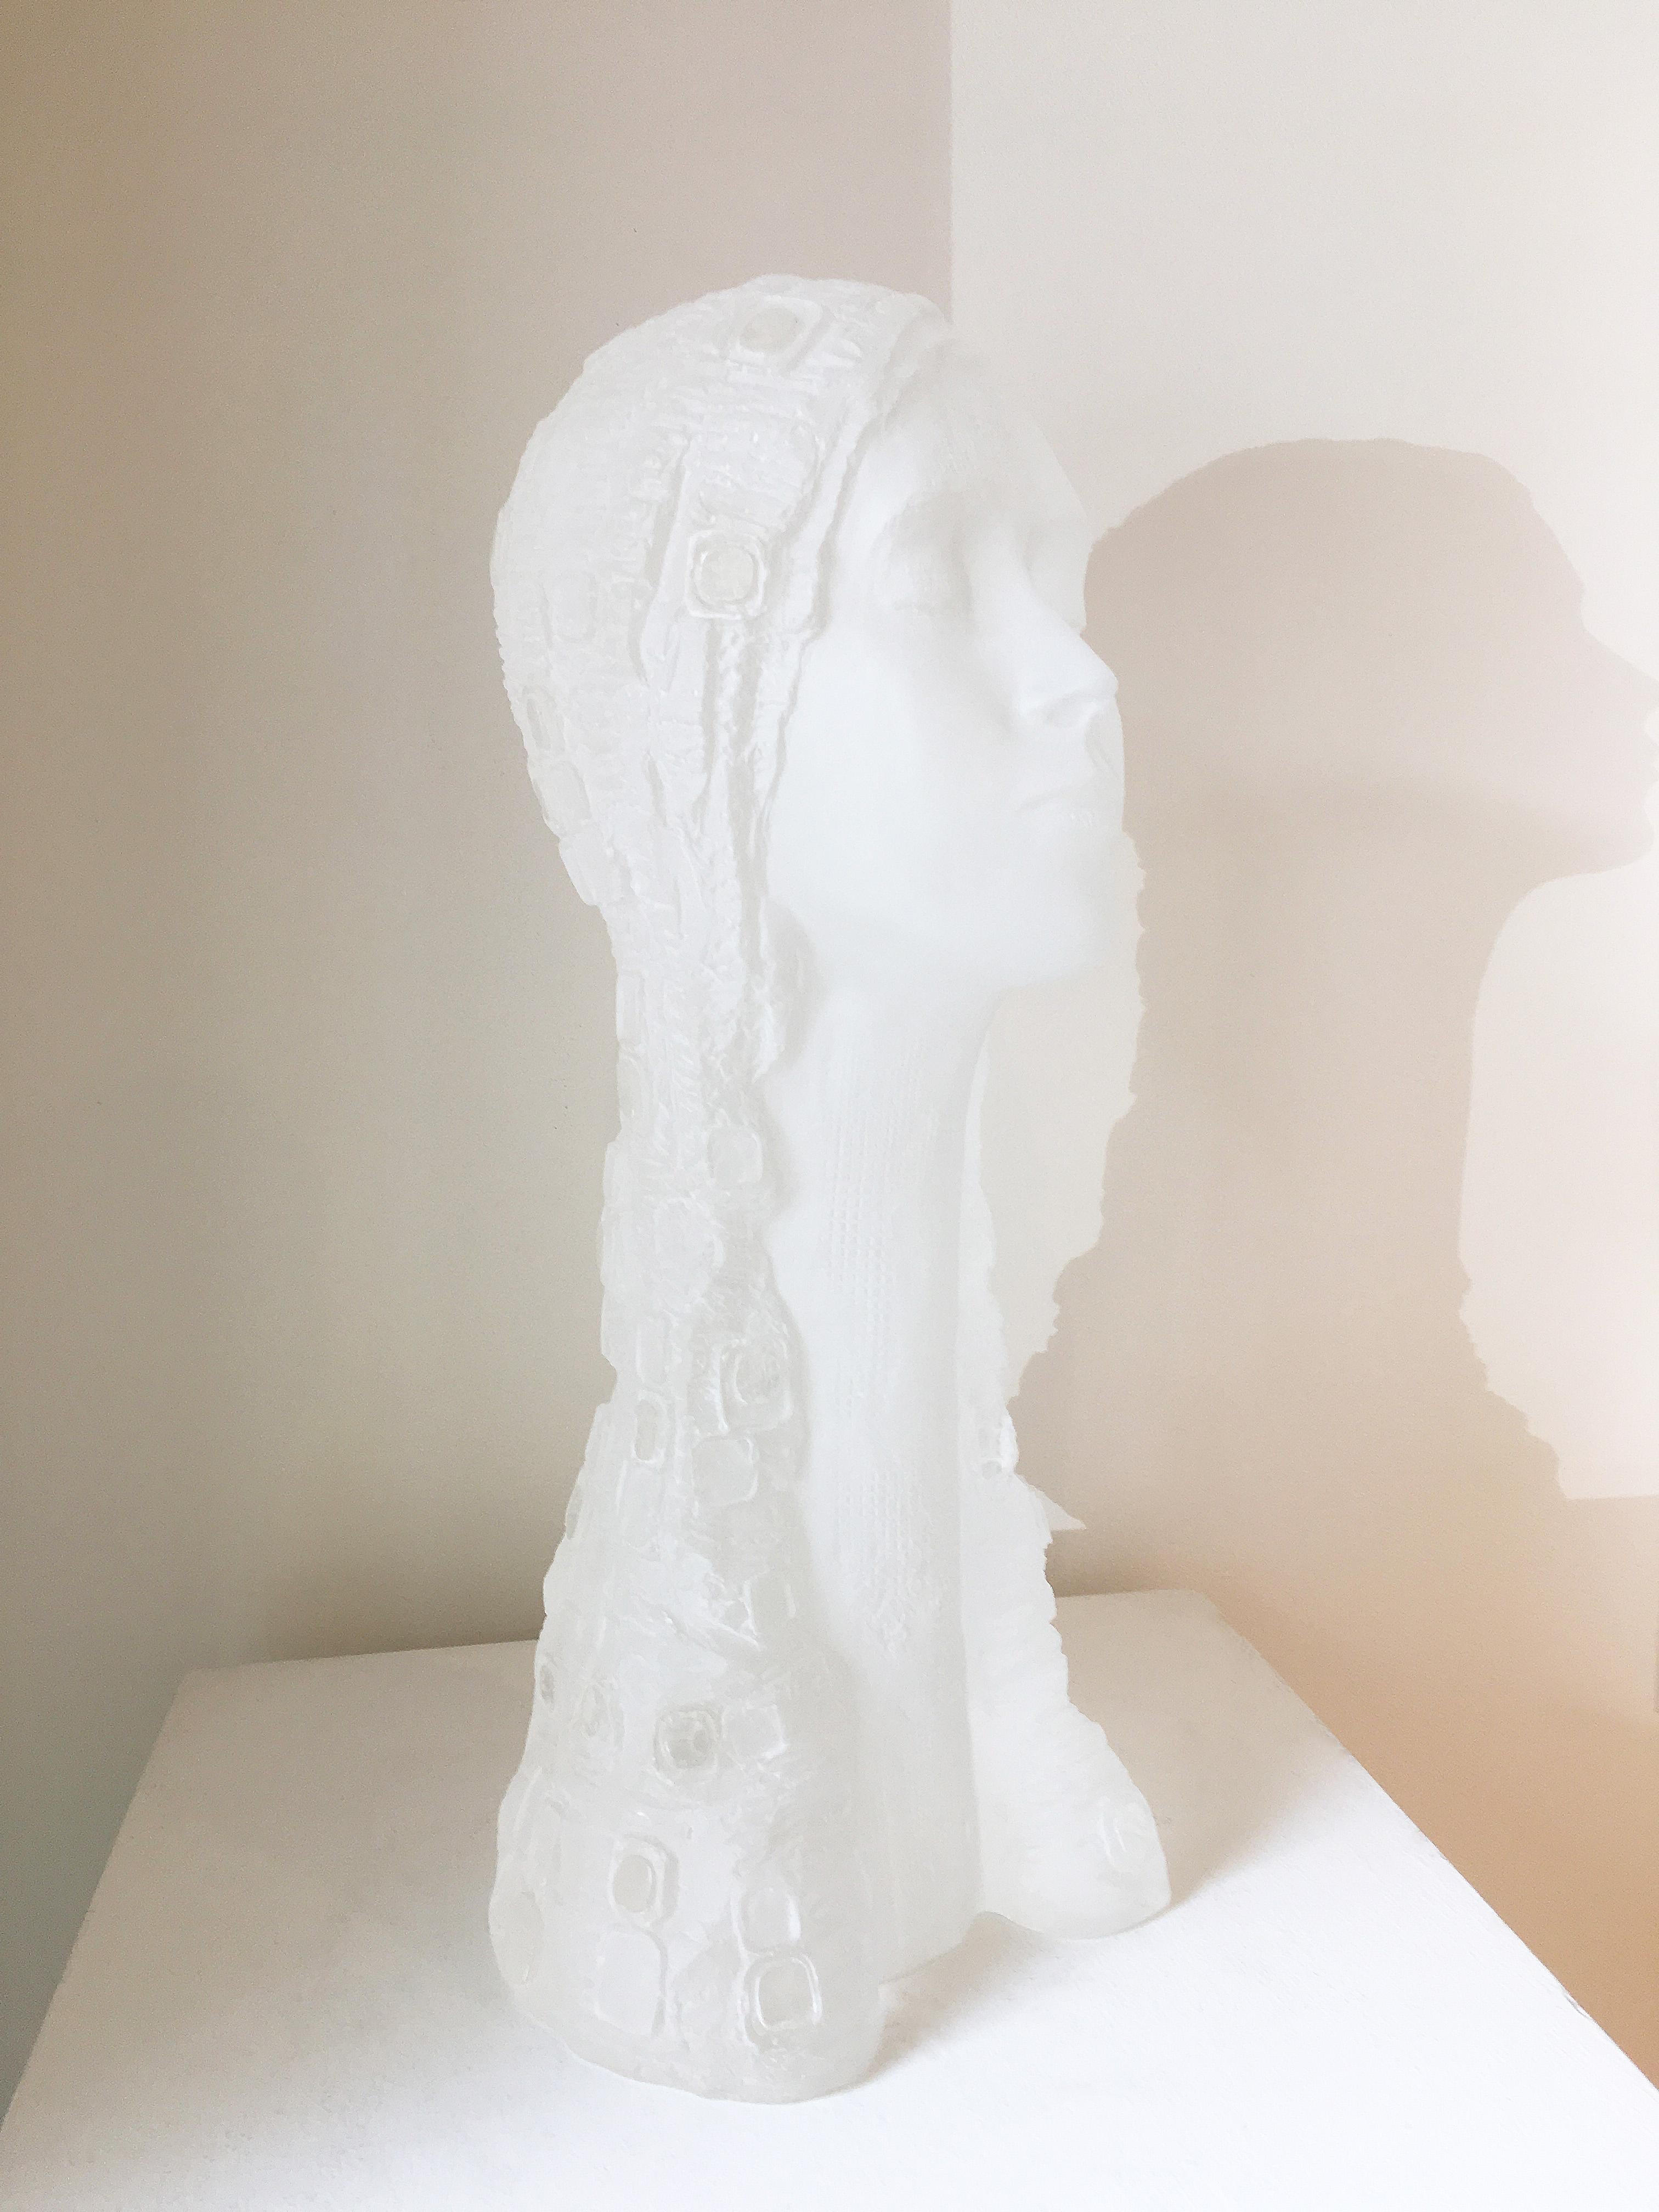 'Dreamer' by Parisian born artist Anne De Villeméjane, 2019. Acrylic, Ed. 3 of 8, 20 x 8 x 7 in. This transparent acrylic sculpture depicts a female bust showcasing a head, neck, and long hair.  Villeméjane takes her viewers into her poetic world